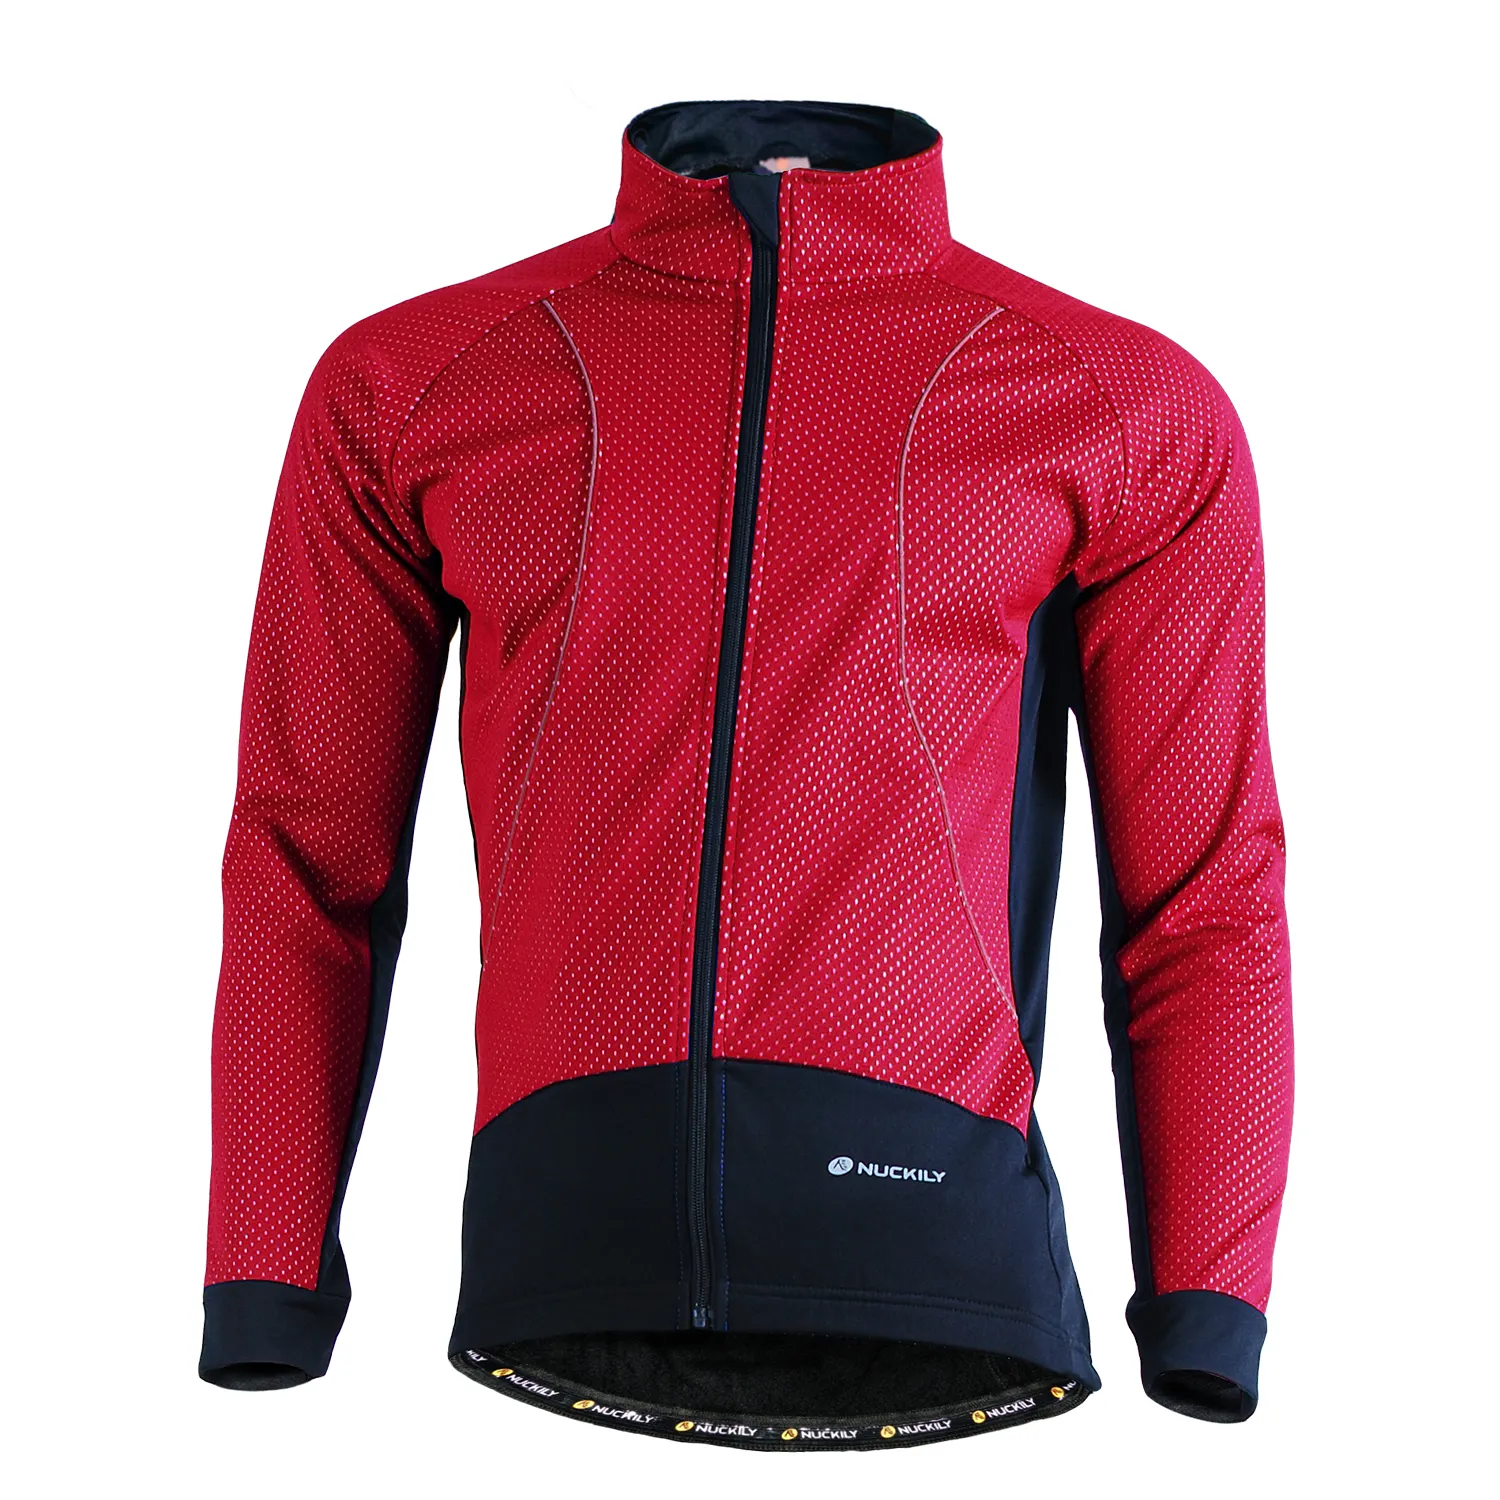 NUCKILY OEM Bicycle Clothing Cycling Jersey Long Sleeve Windproof Bicycle Clothing Men Cycling Winter Jersey